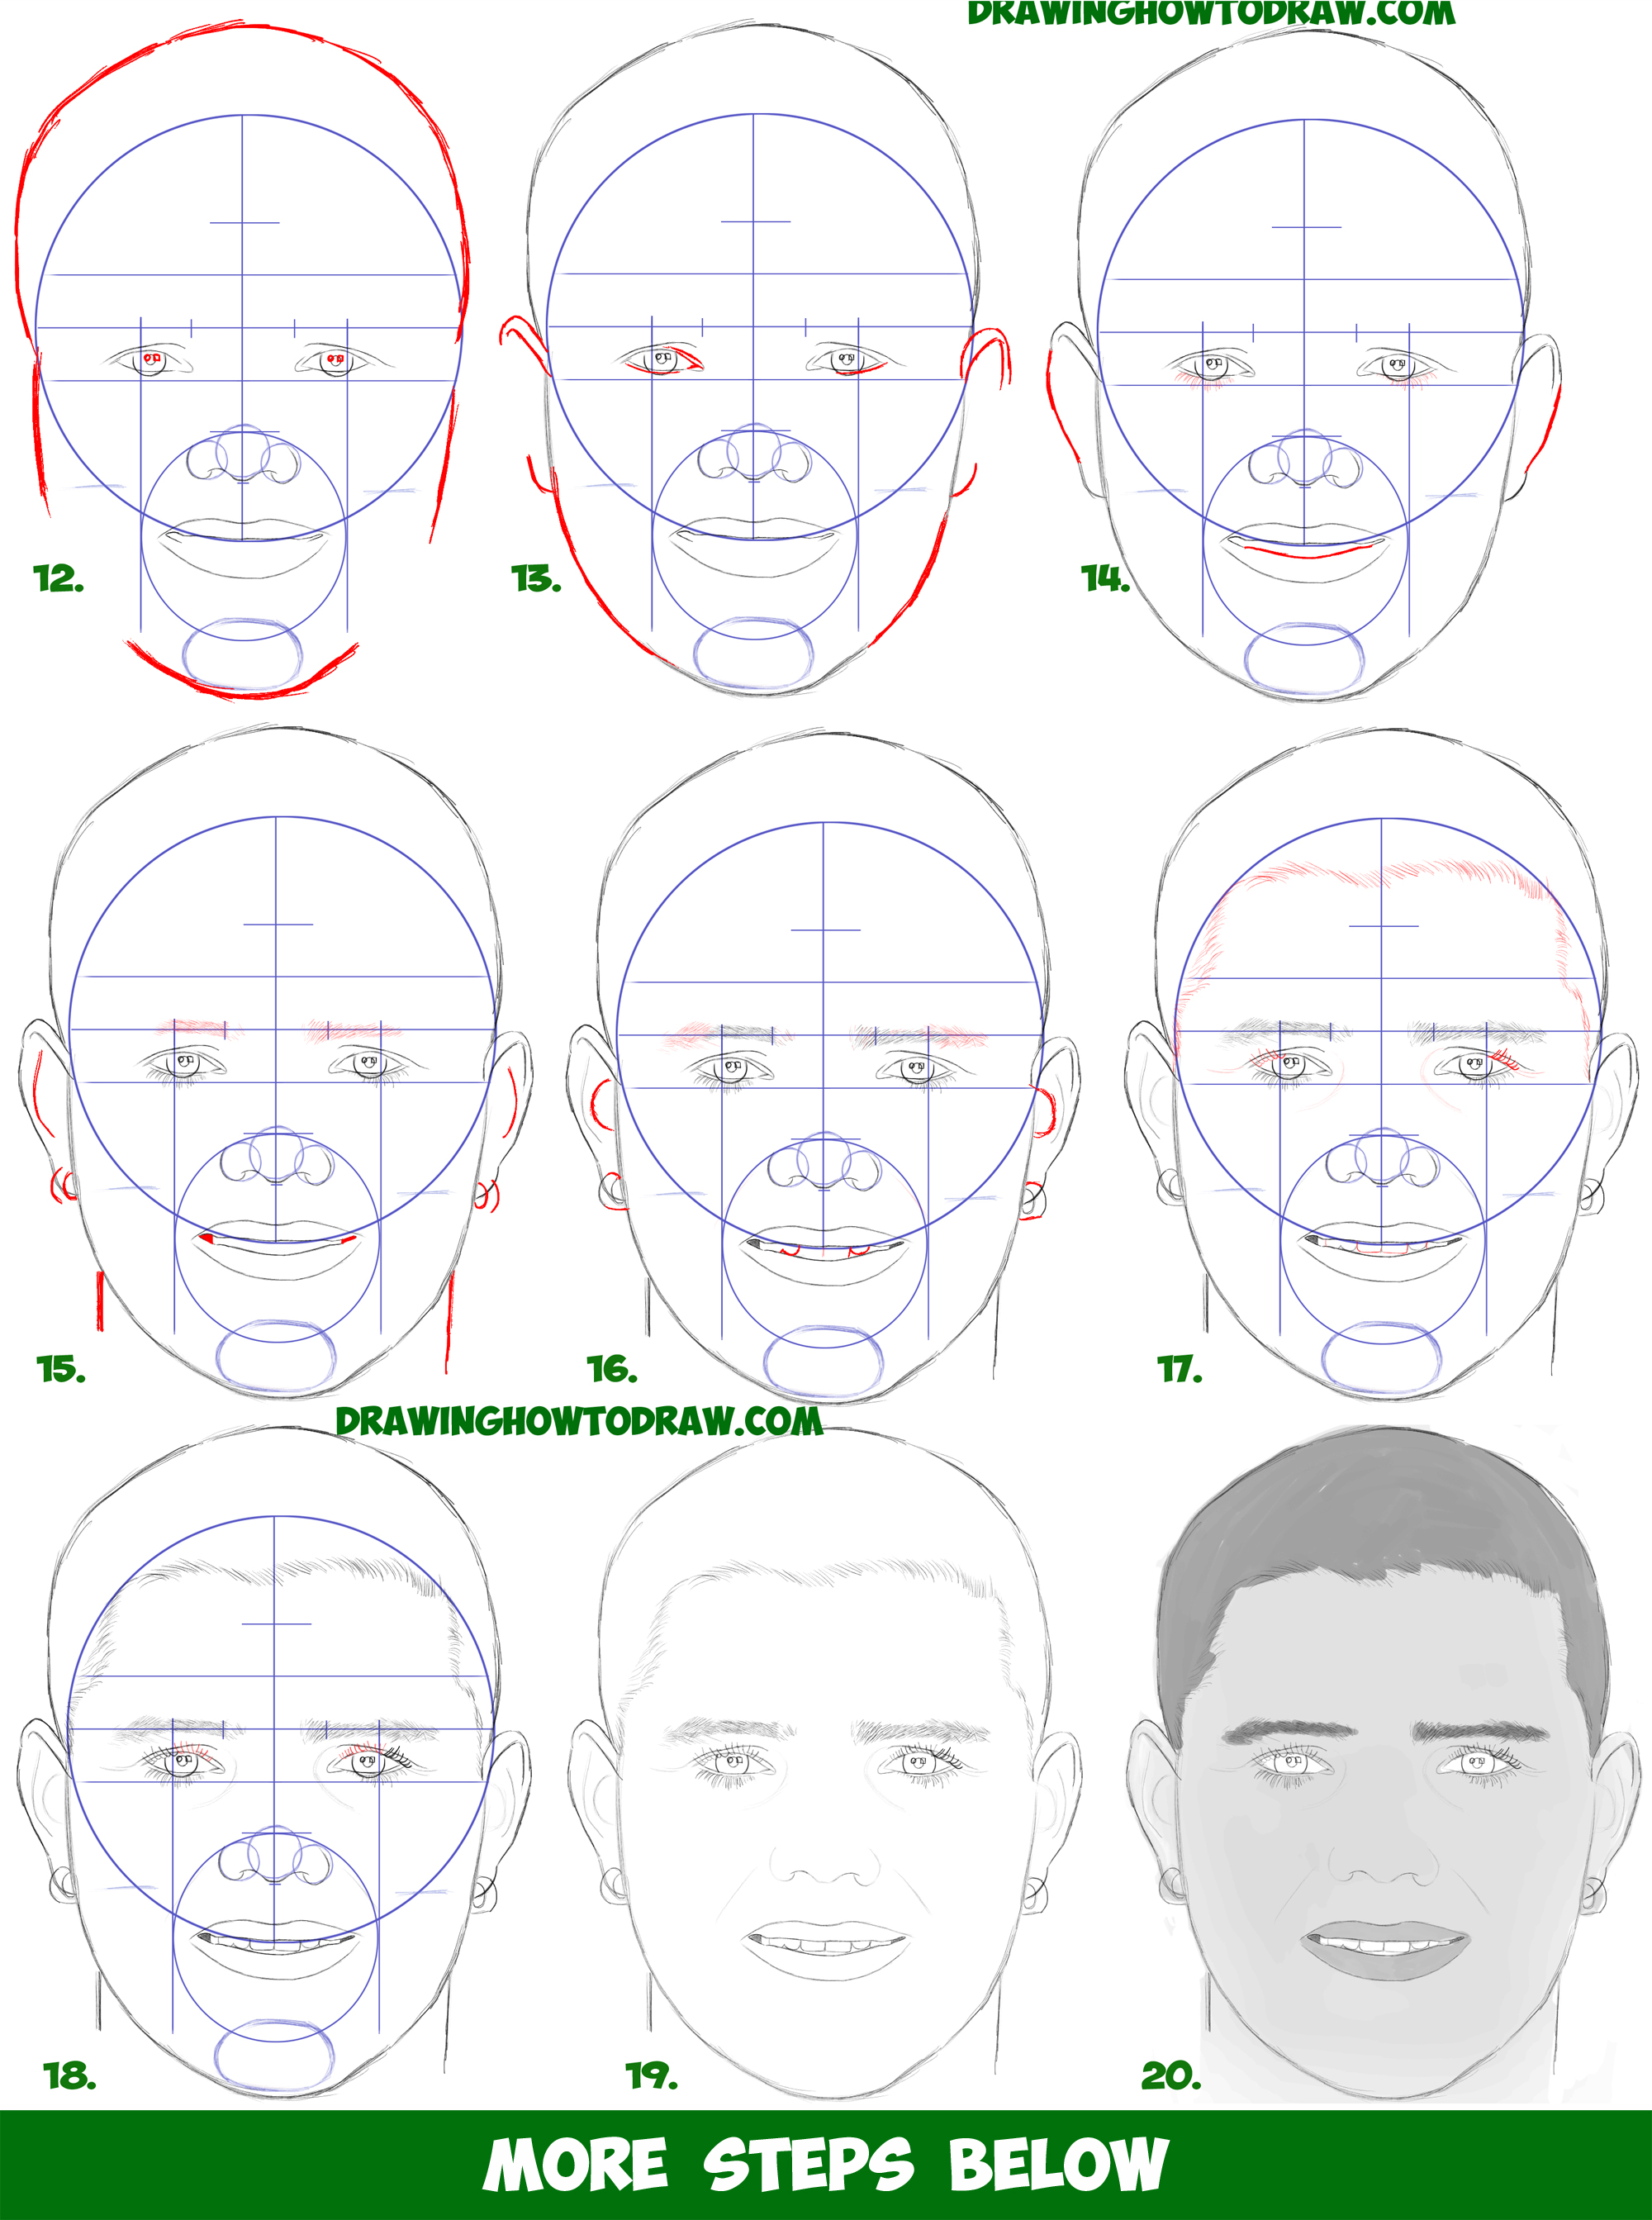 Learn How to Draw Mauro Icardi - Drawing a Realistic Man's Face with Beard from Front View Simple Steps Drawing for Beginners